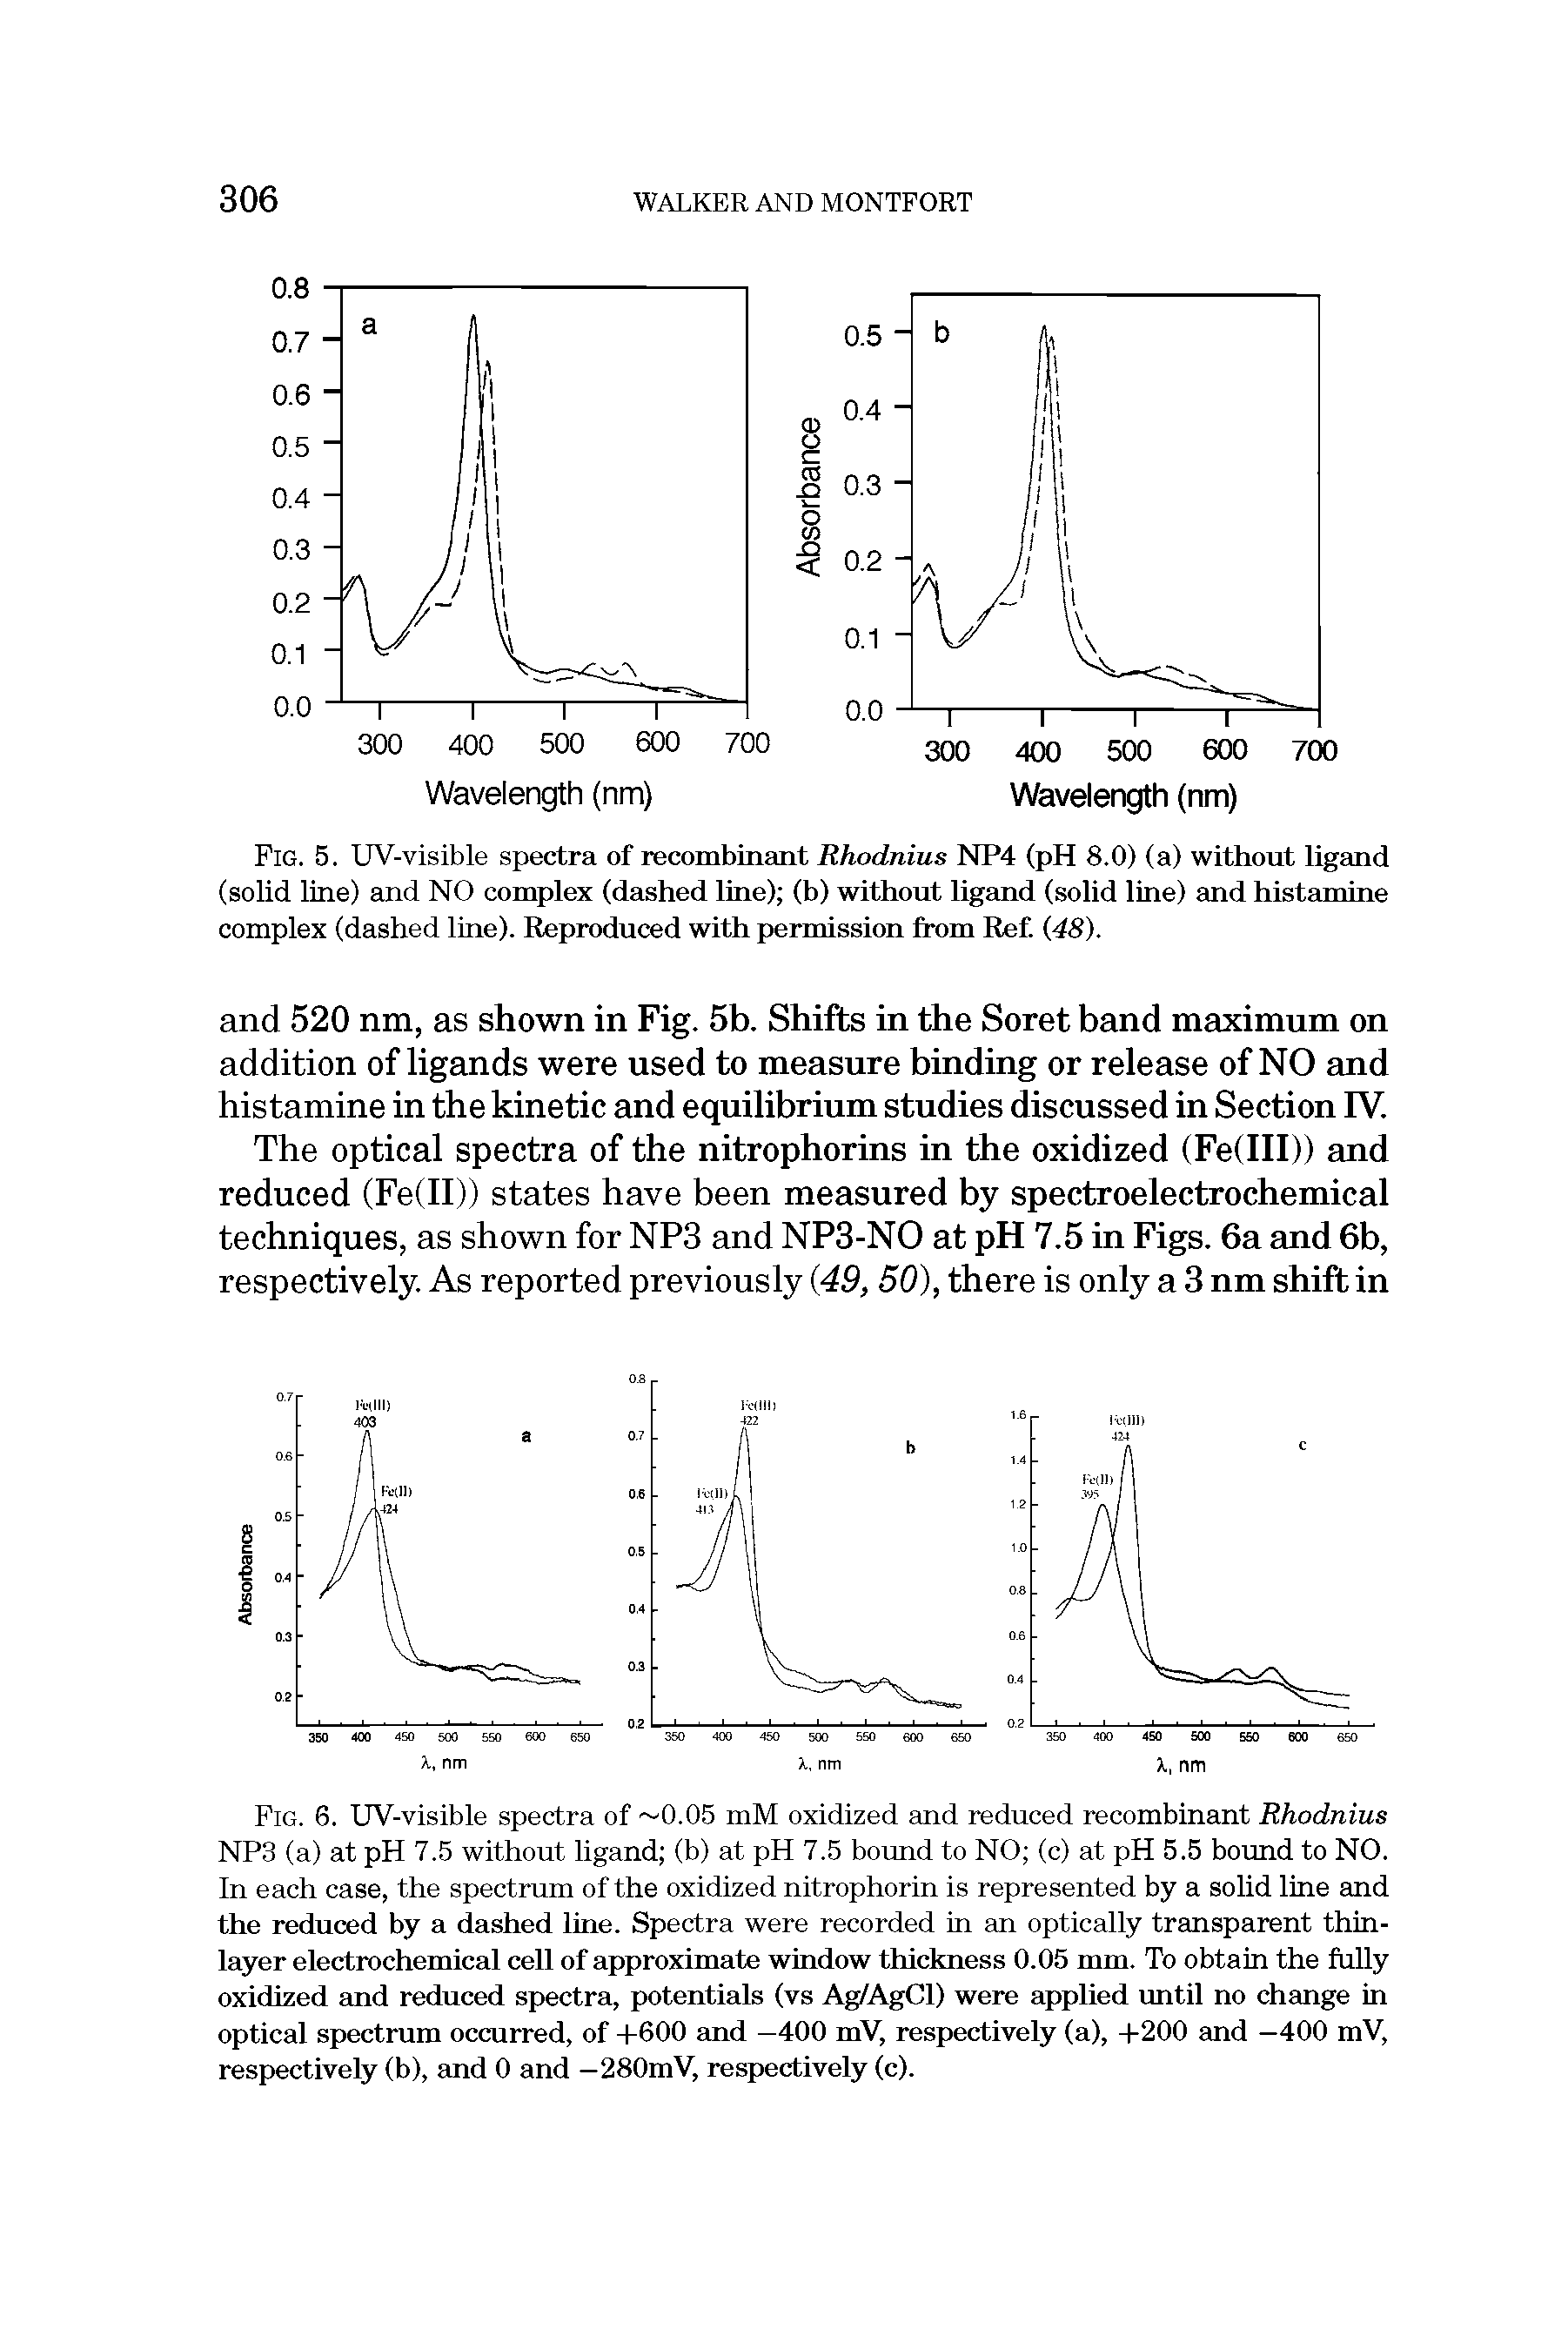 Fig. 5. UV-visible spectra of recombinant Rhodnius NP4 (pH 8.0) (a) without ligand (solid line) and NO complex (dashed line) (b) without ligand (solid line) and histamine complex (dashed line). Reproduced with permission from Ret (48).